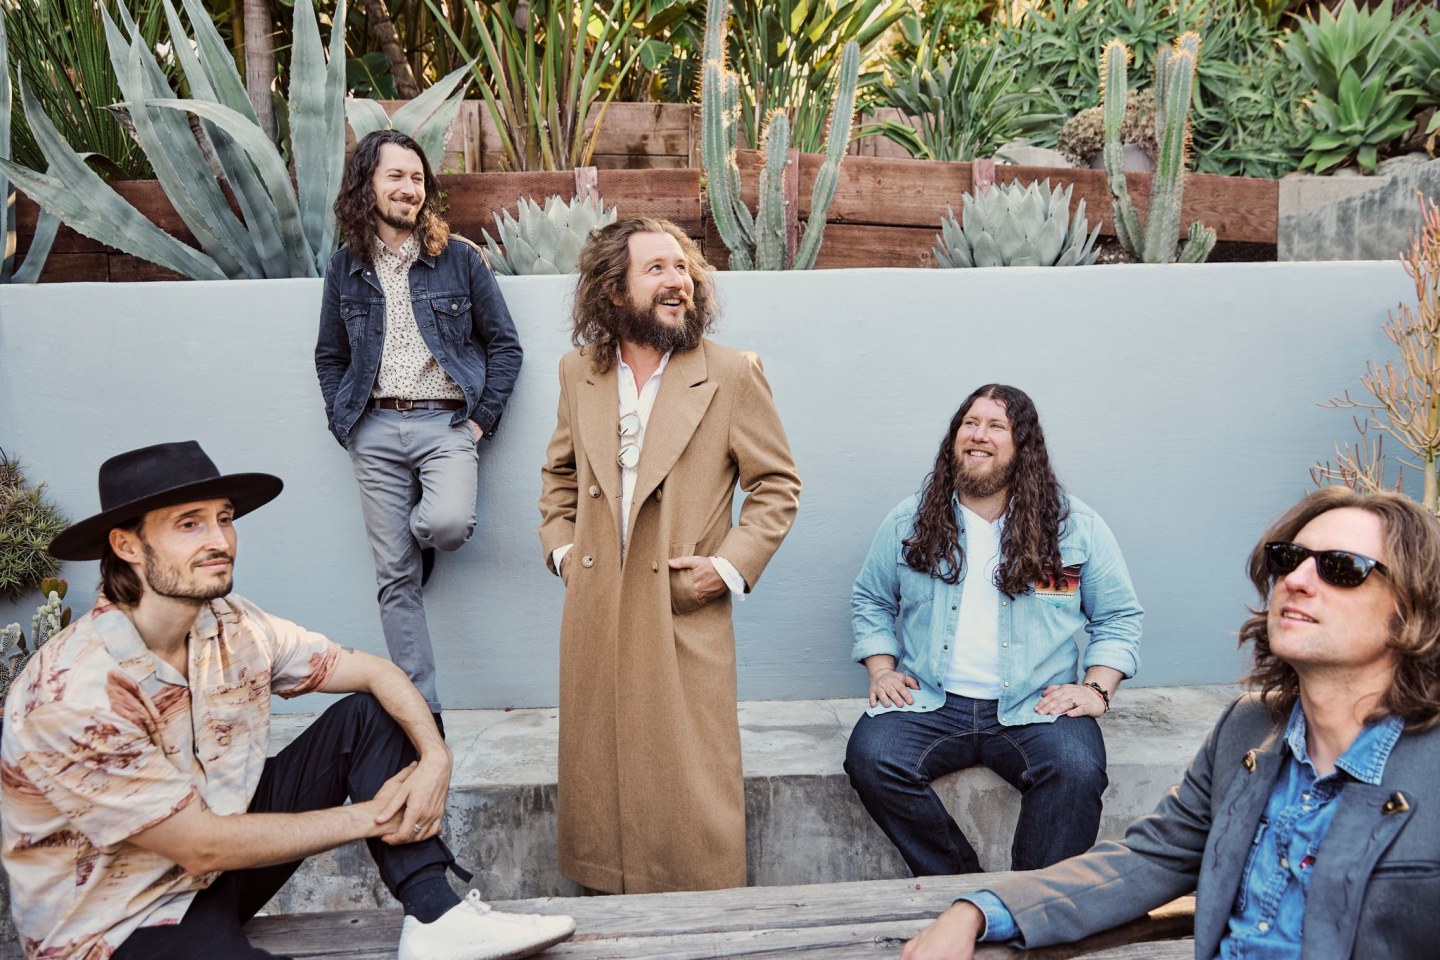 My Morning Jacket’s Jim James on hallowed studios, walking New York, and finding God in drums